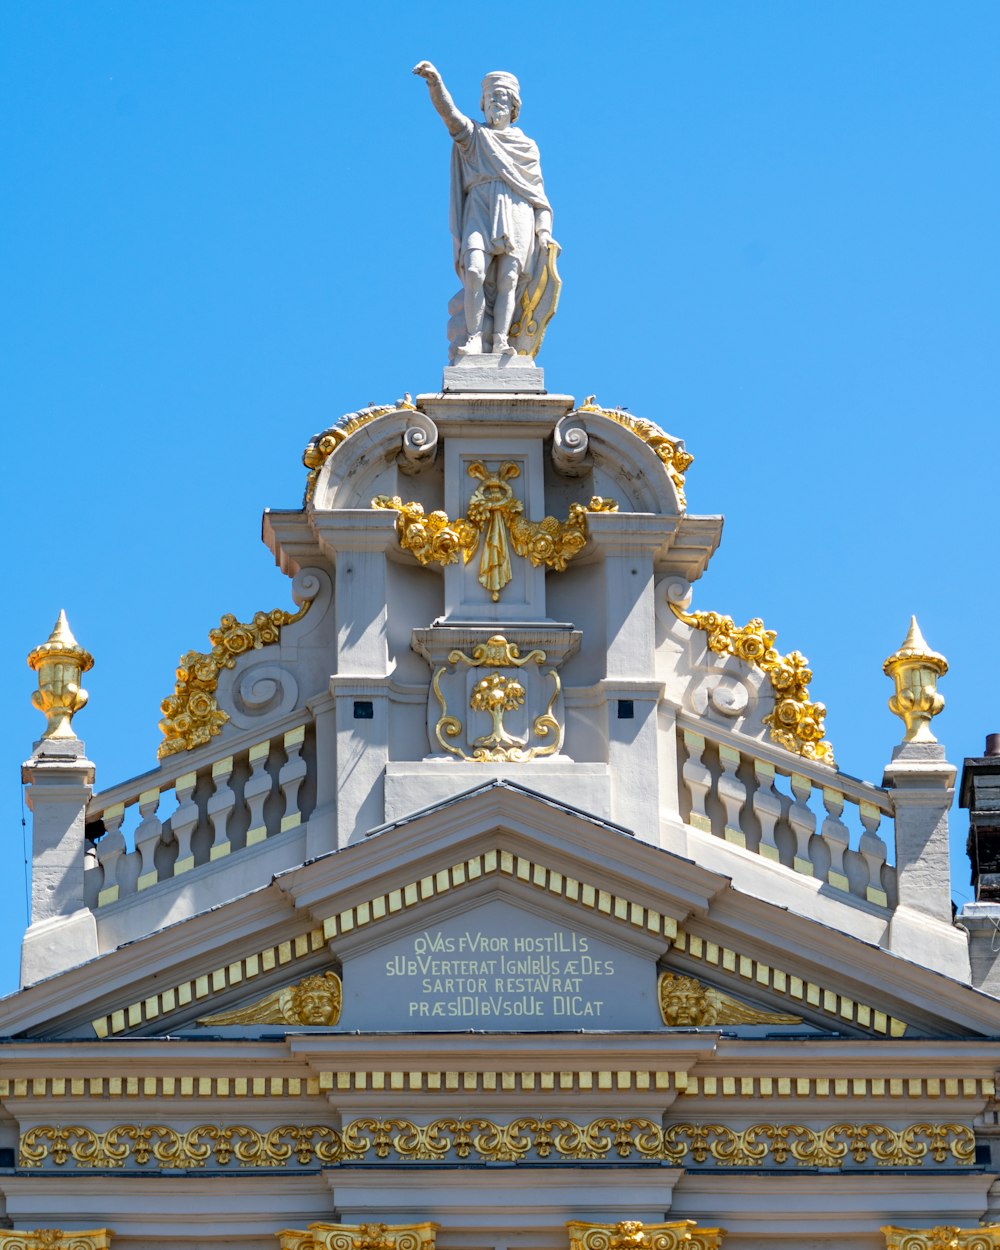 a statue of a man on top of a building